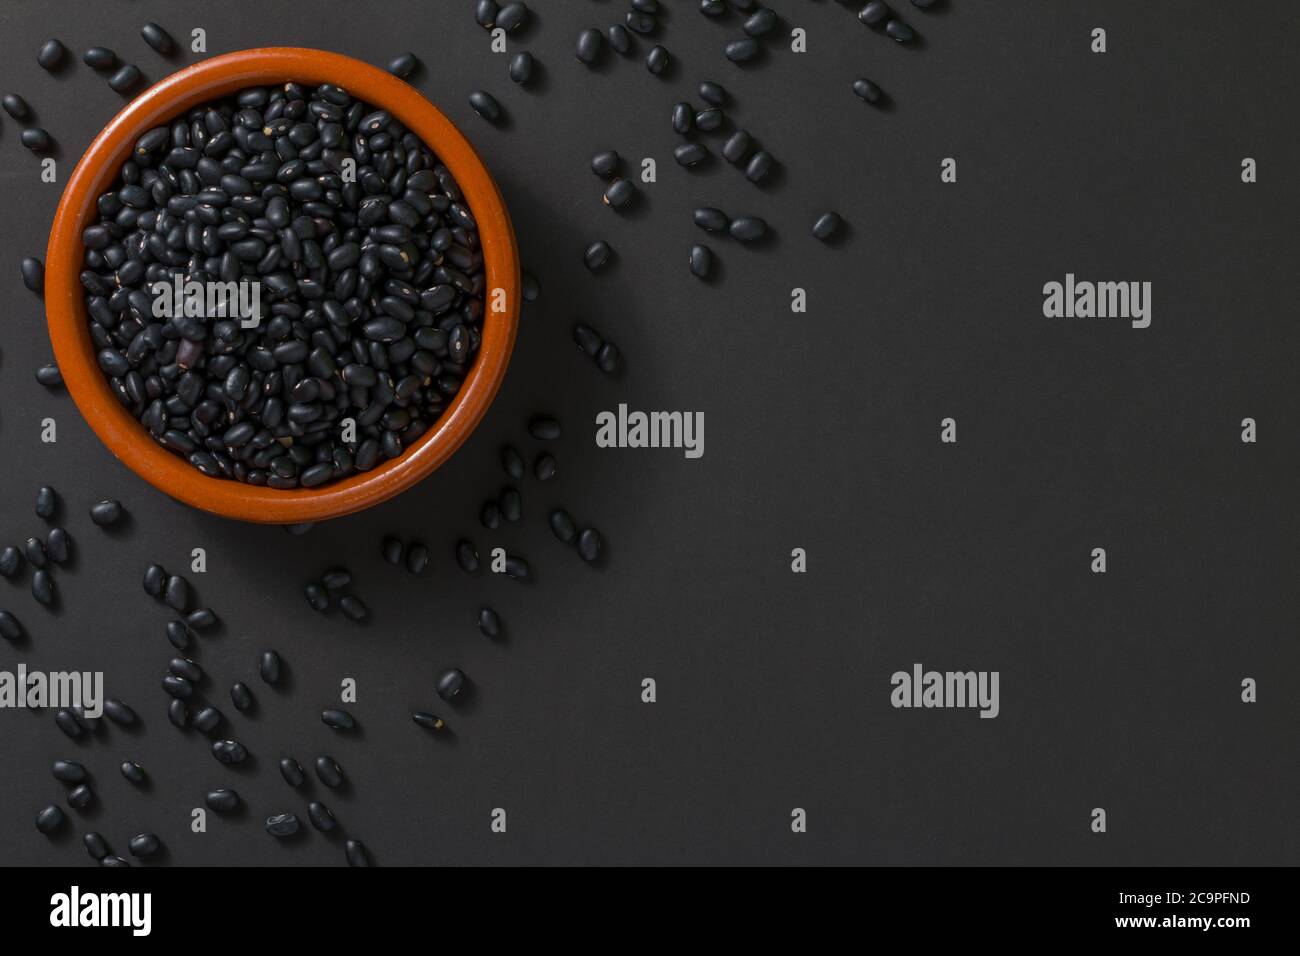 Top view of a bowl with black beans on a black background. Stock Photo